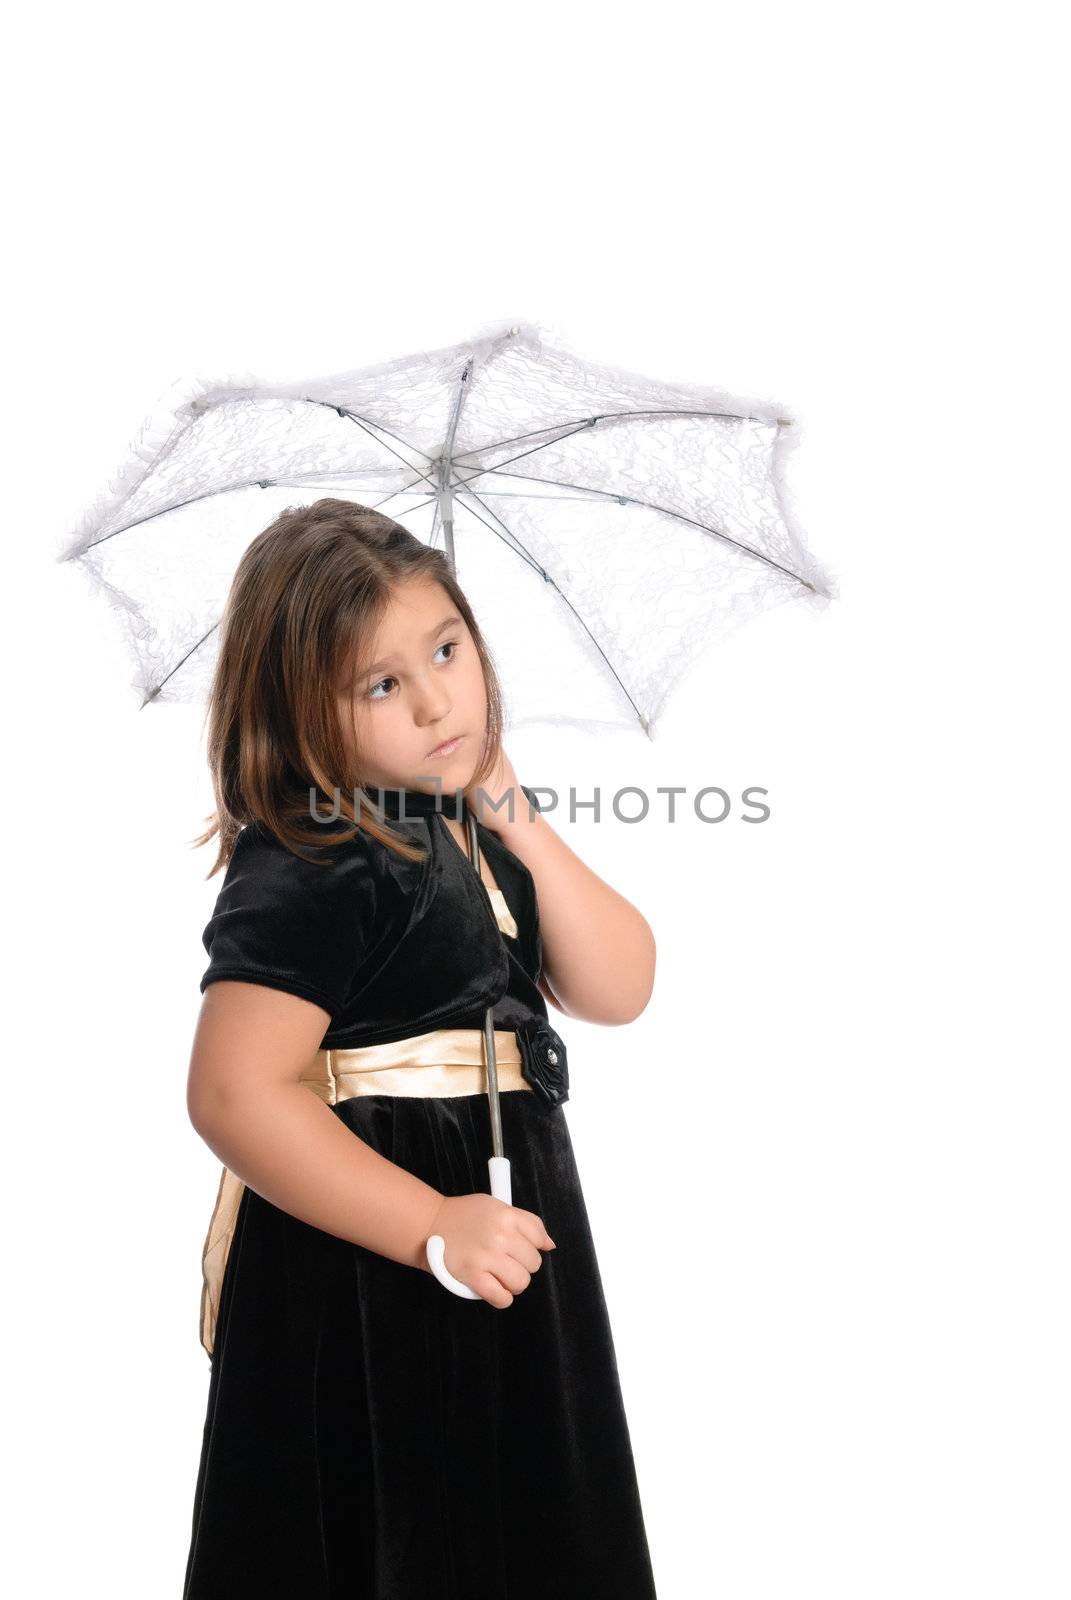 A cute shy little girl is wearing a dress and holding an umbrella, isolated against a white background